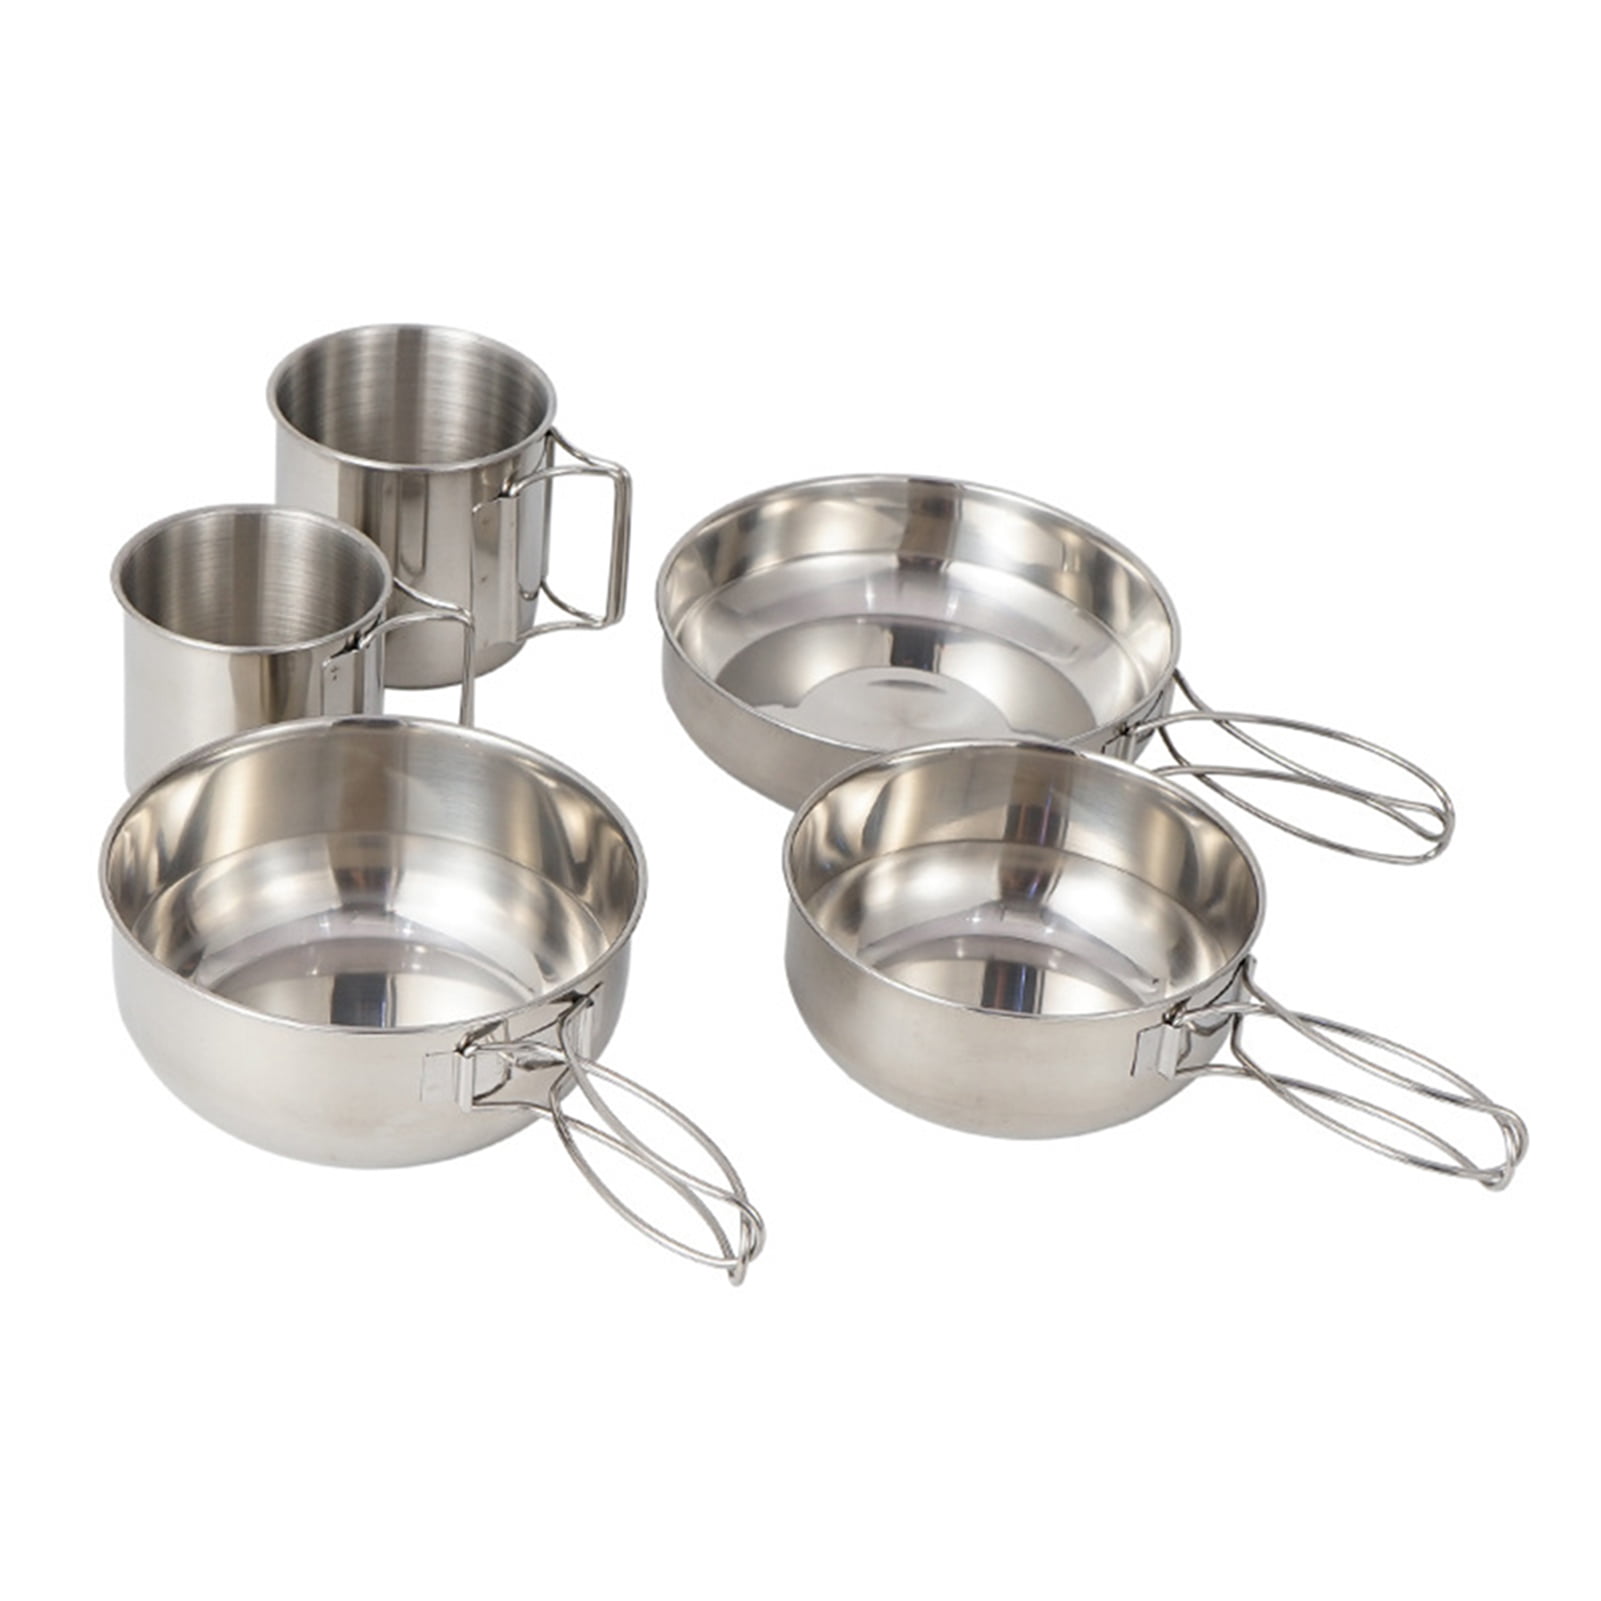 Camping Picnic Cookware Set Stainless Steel Pan Pot Outdoor Hiking Cooking Bowl 